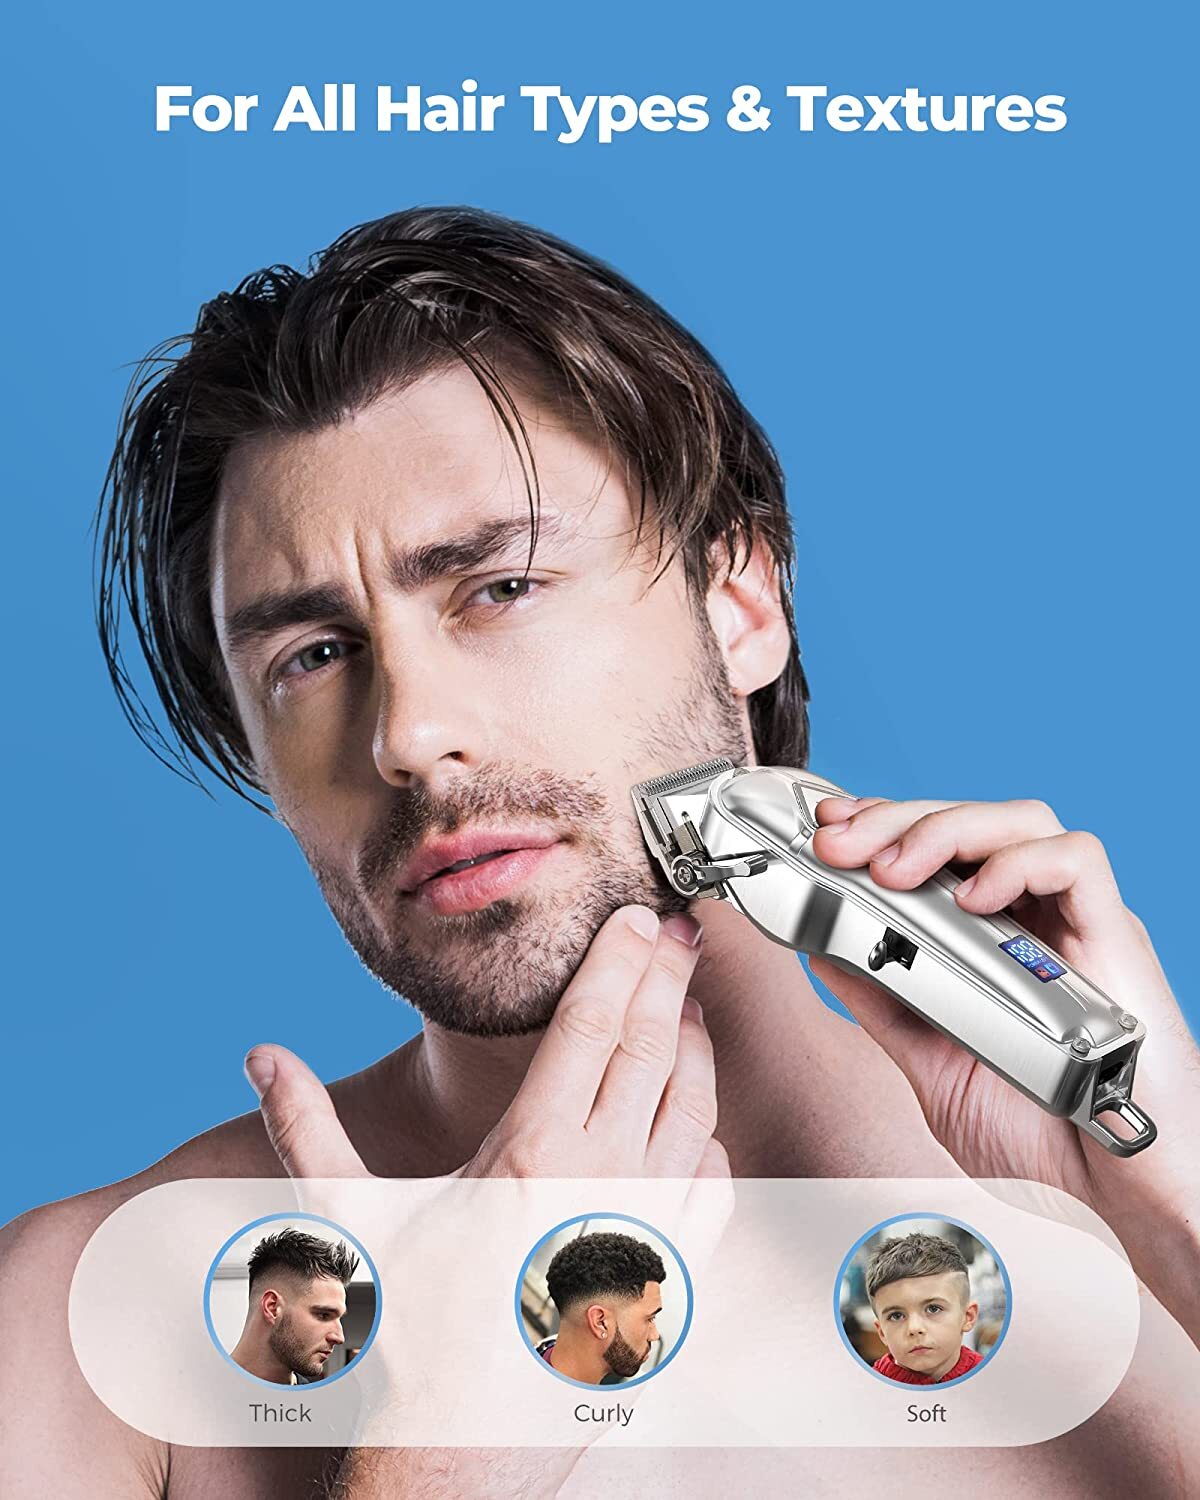 Wahl Clipper Lithium-Ion Cordless Haircutting Kit Rechargeable Grooming and Trimming Kit with 12 Guide Combs for Heads, Beard, ＆ All Body Grooming